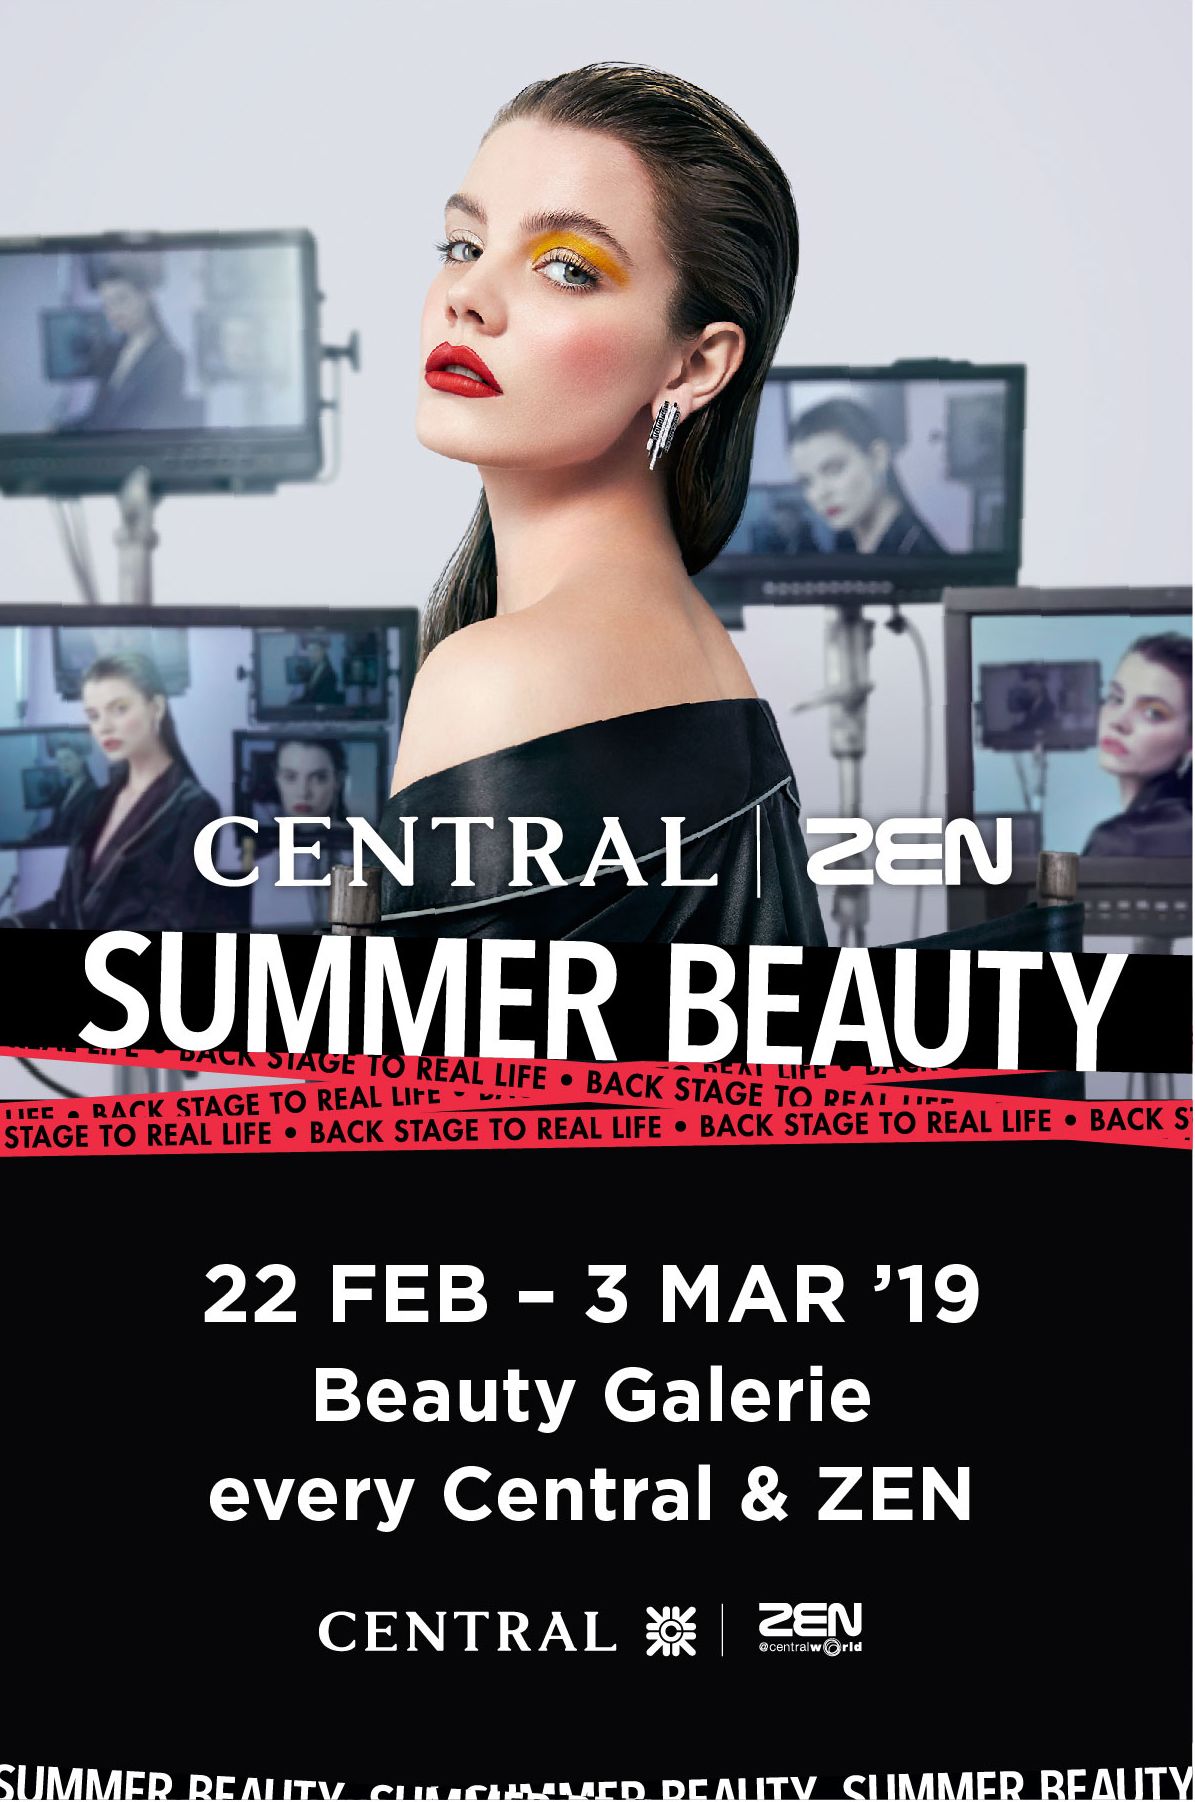 CENTRAL I ZEN SUMMER BEAUTY BACK STAGE TO REAL LIFE